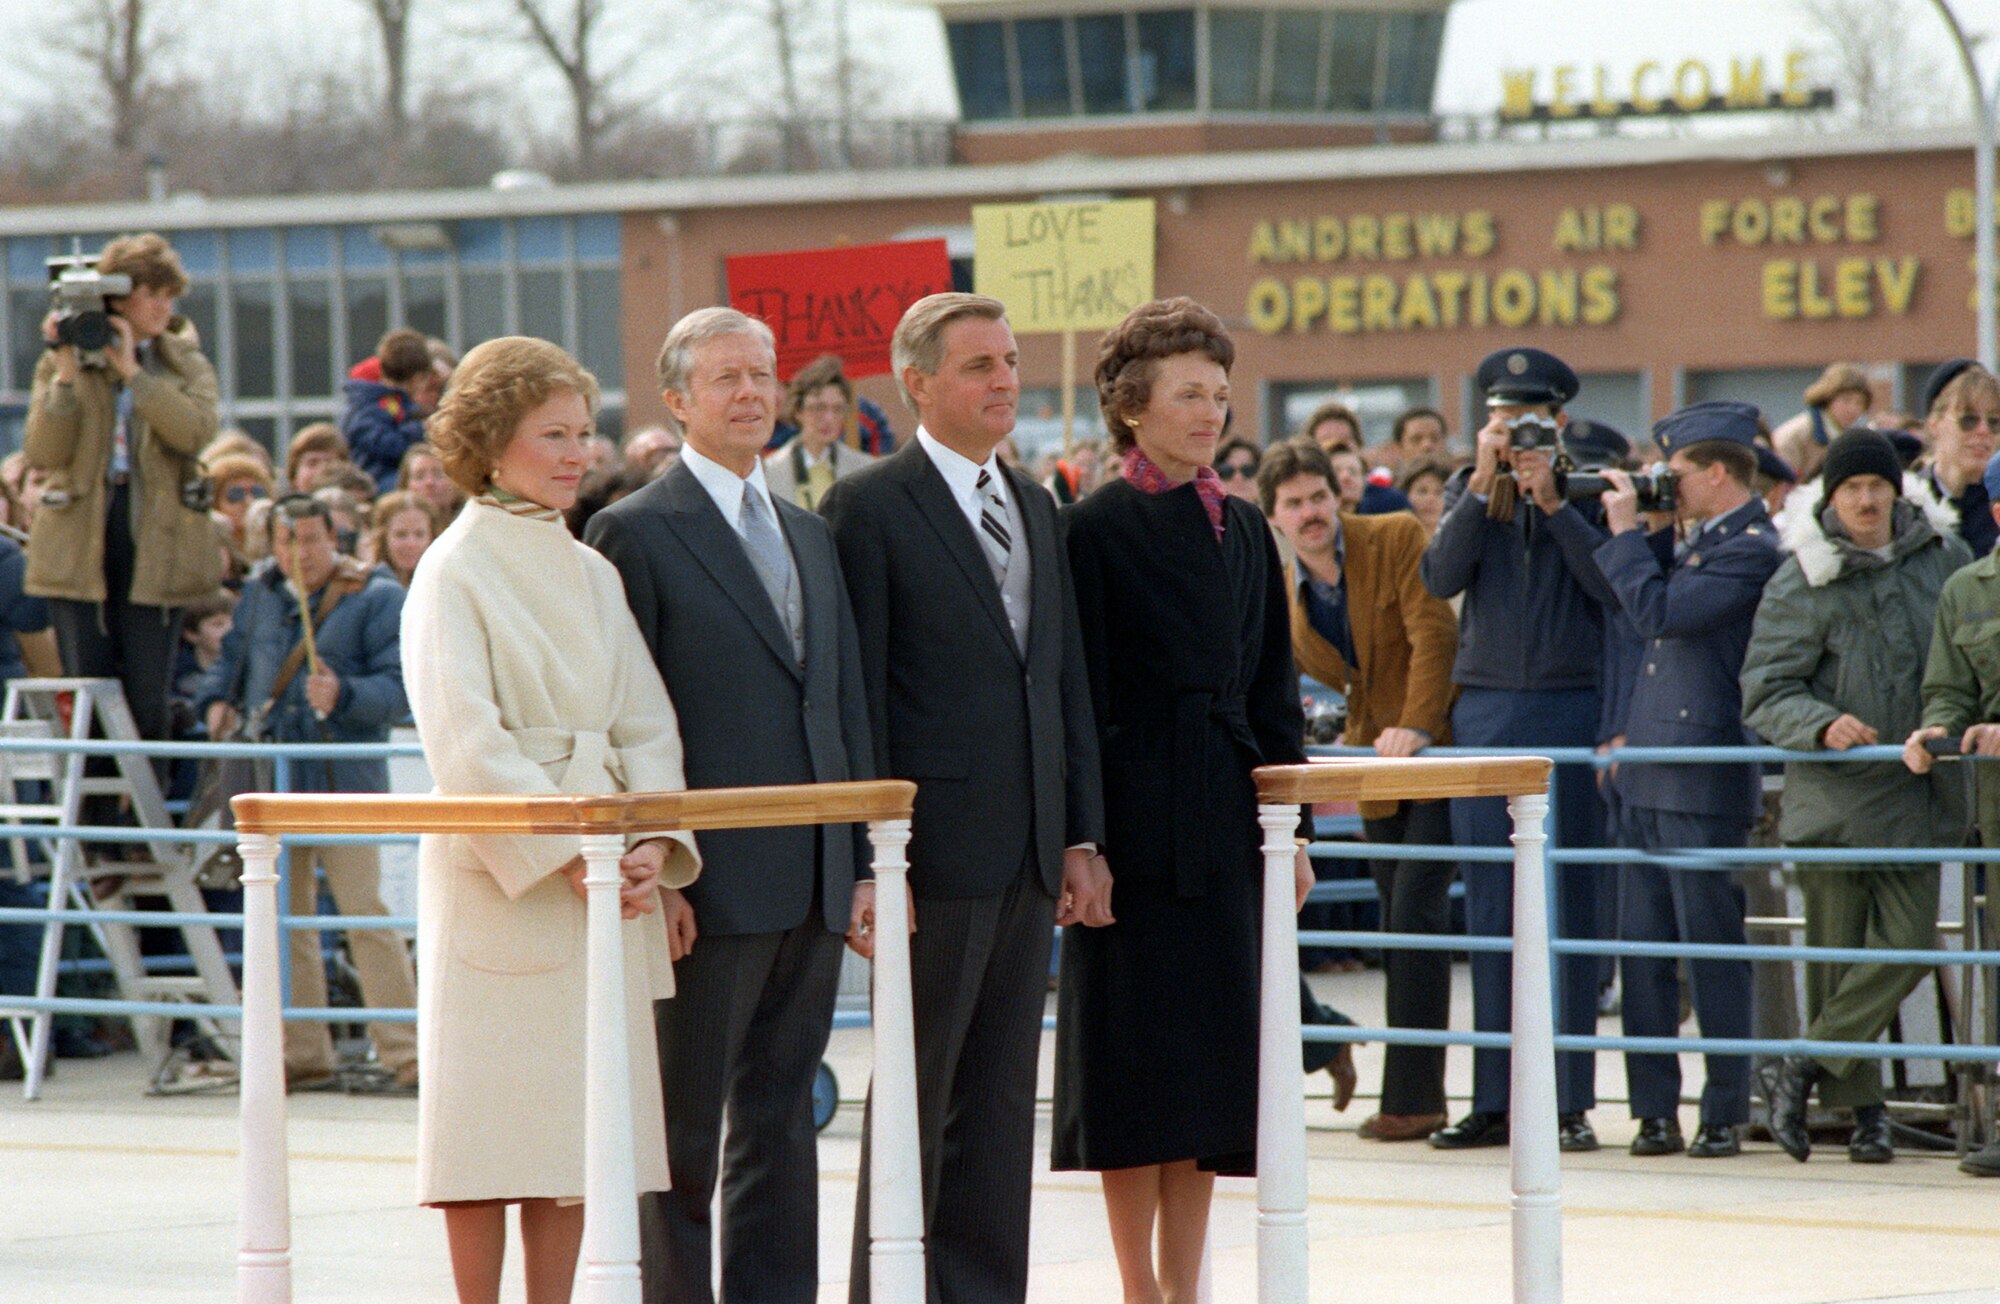 Former President and his wife stands with a former vice president and his wife on the flight line with a crowd of people surrounding them.